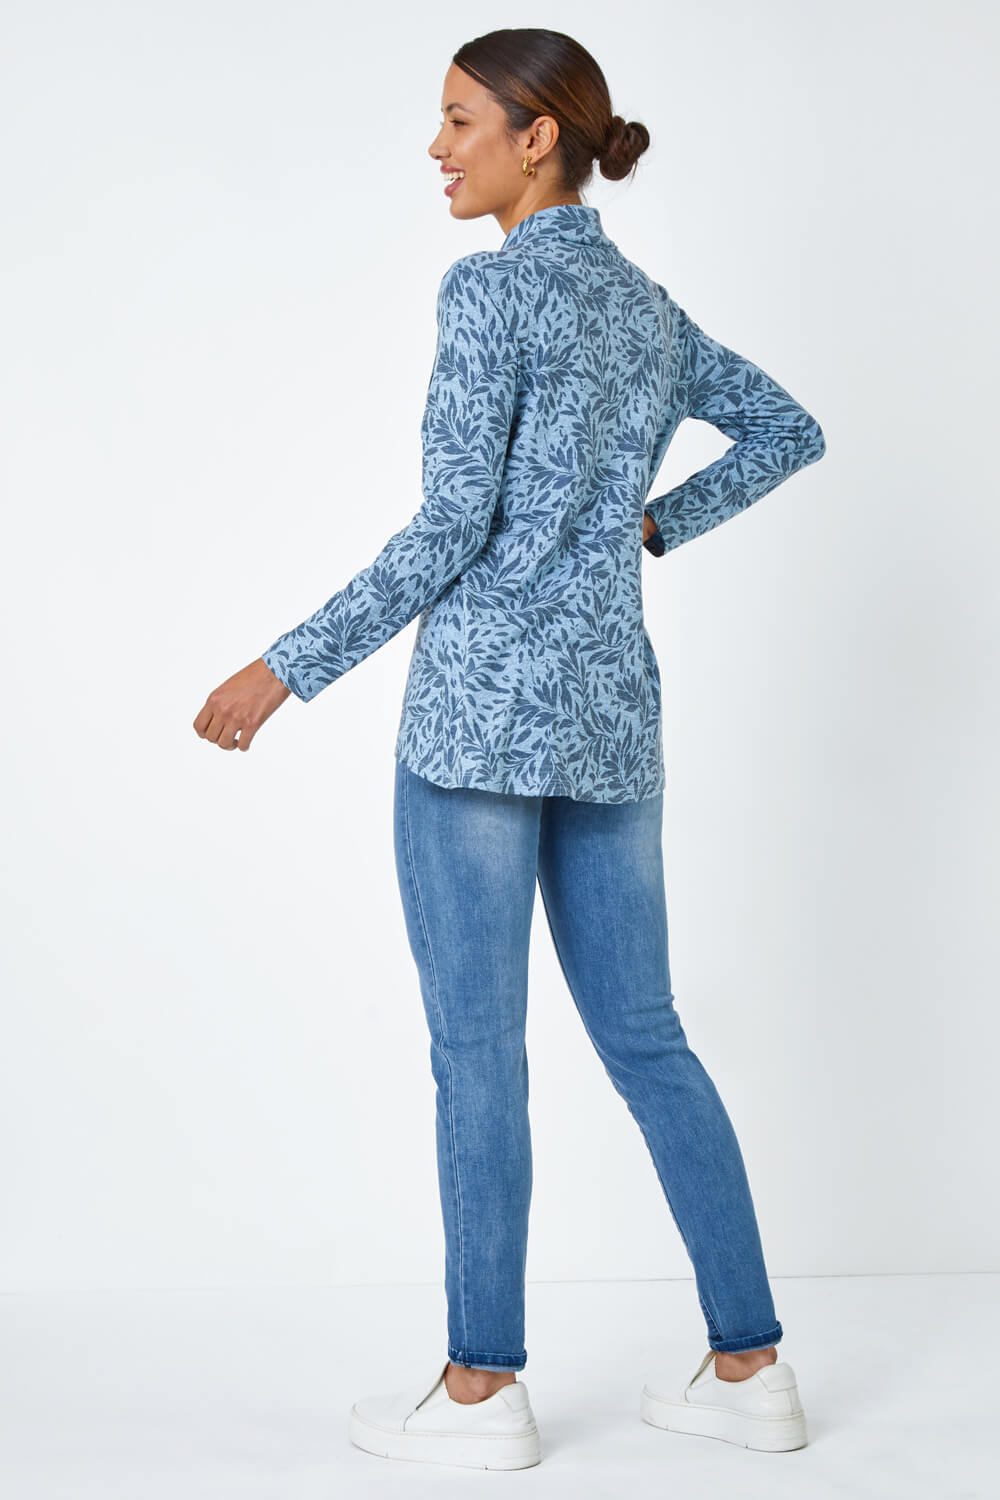 Blue Floral Print Cowl Neck Stretch Top , Image 3 of 5